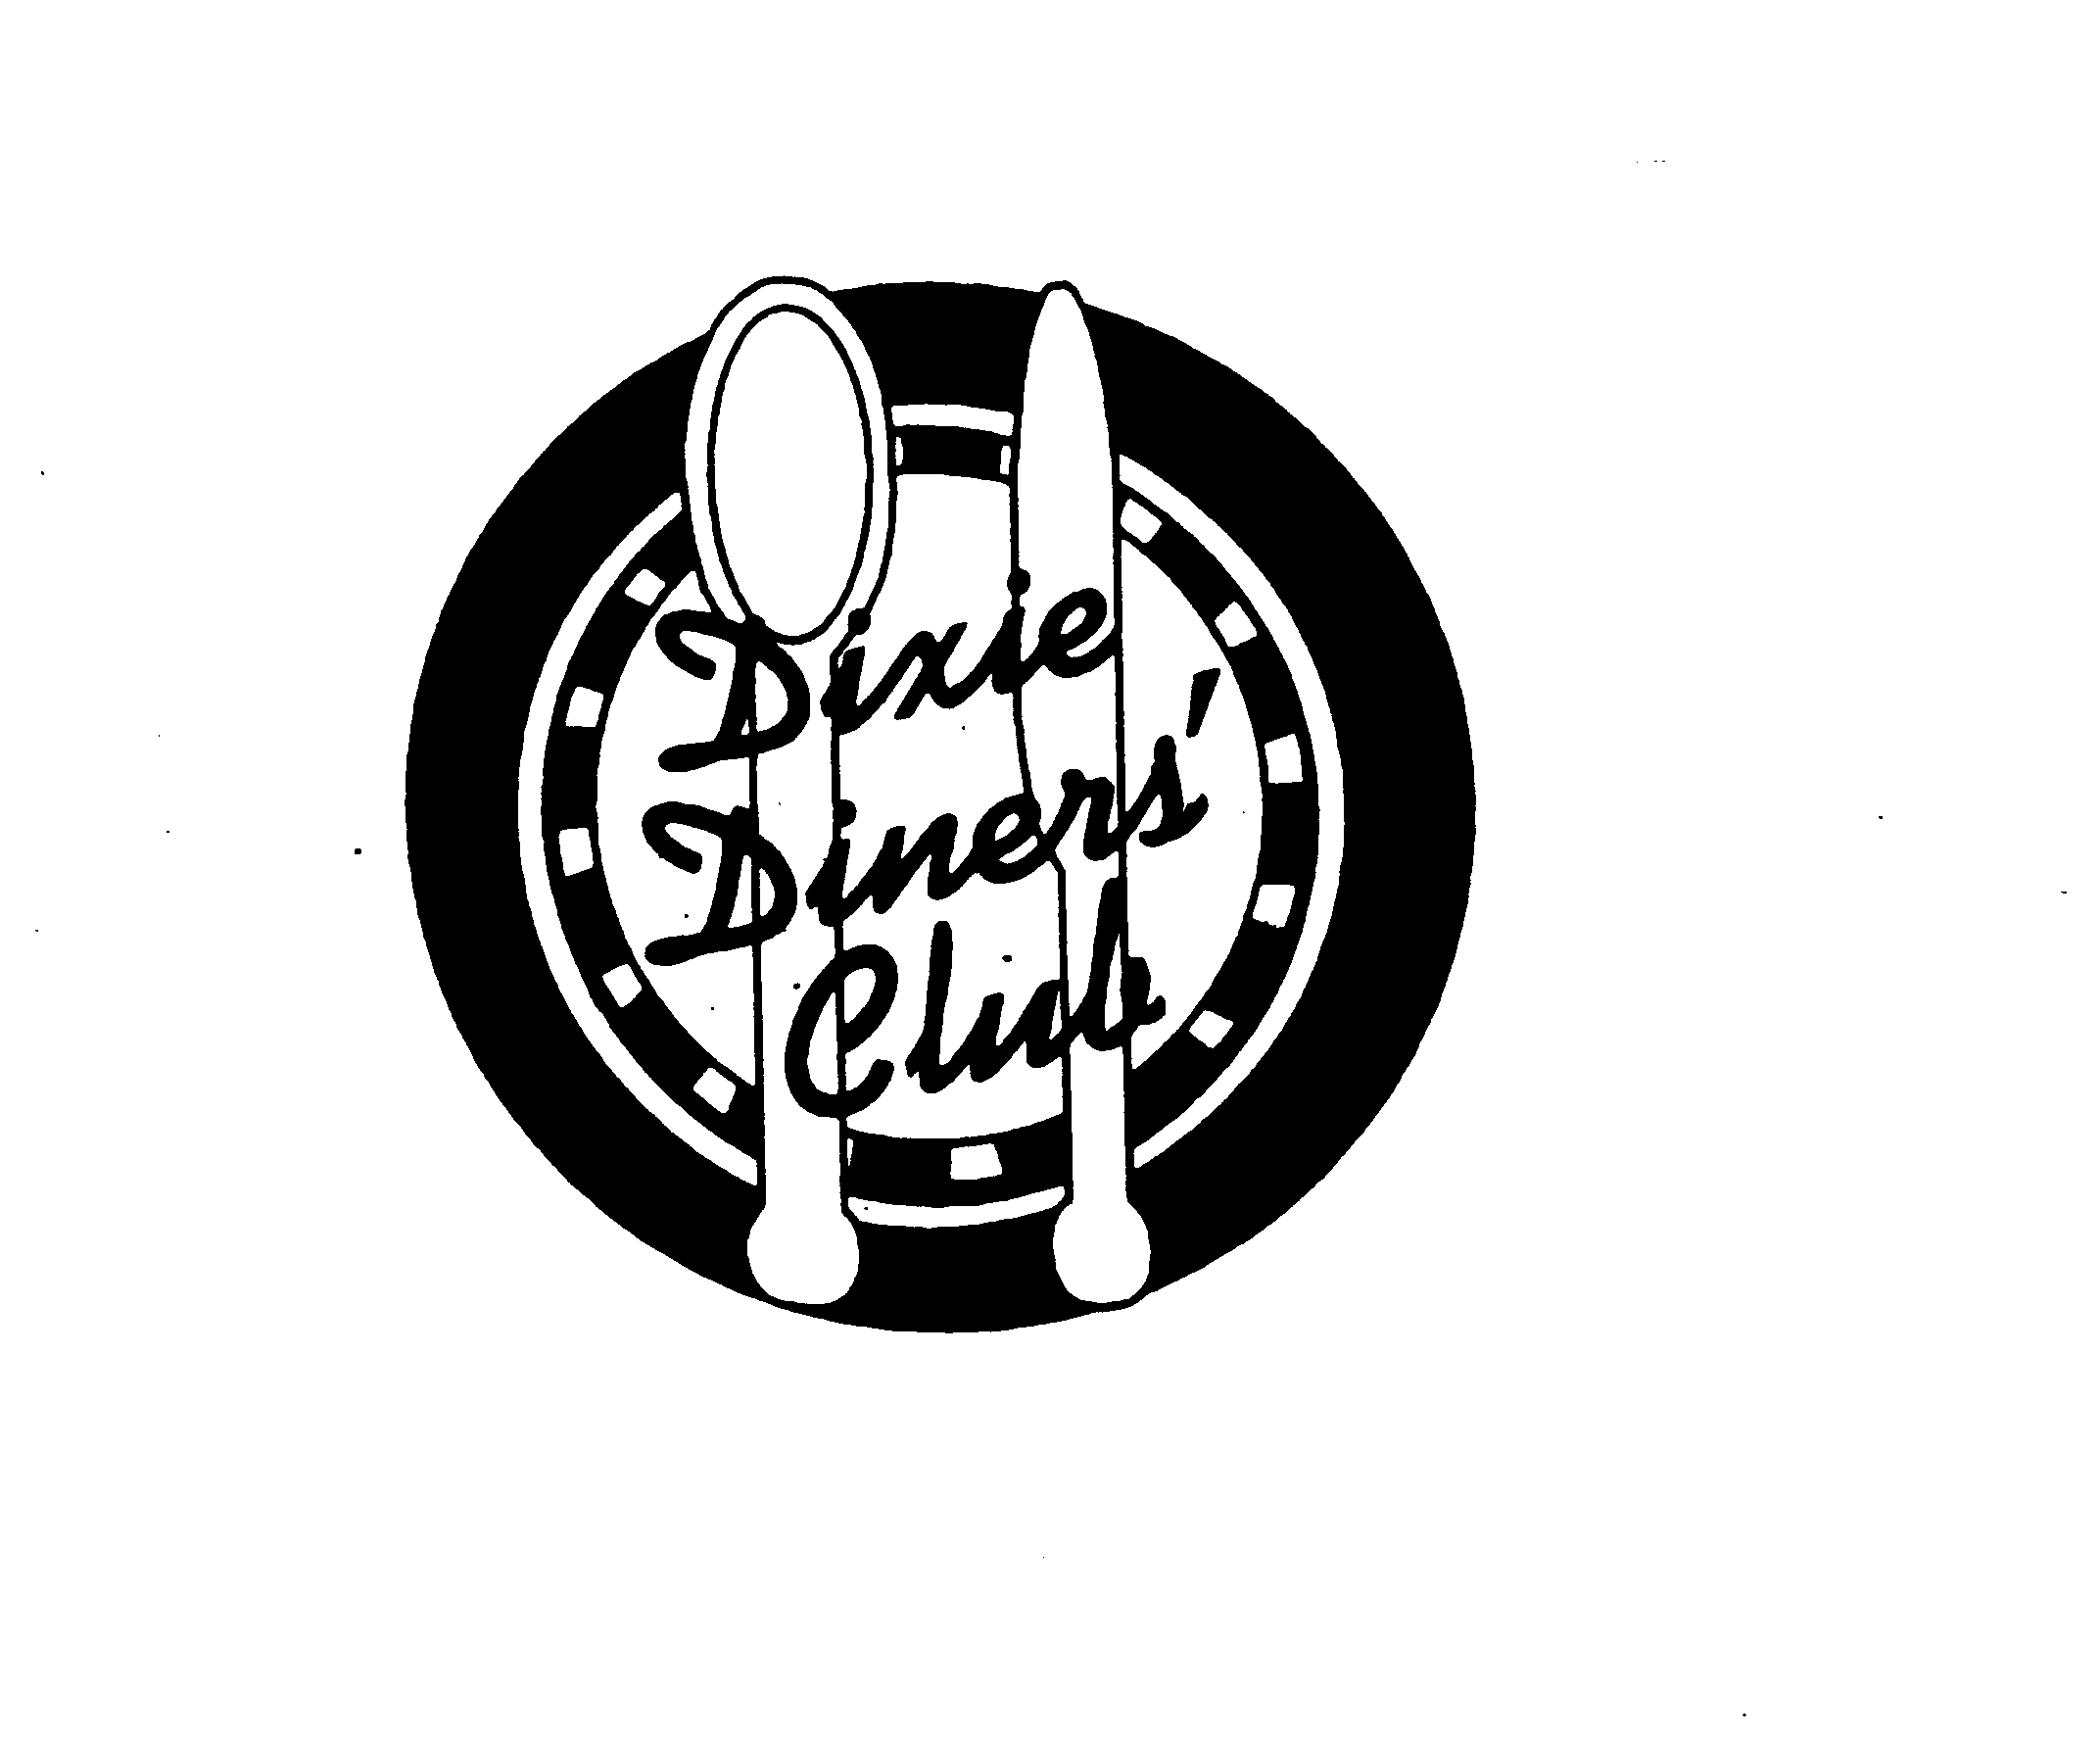  DIXIE DINERS' CLUB